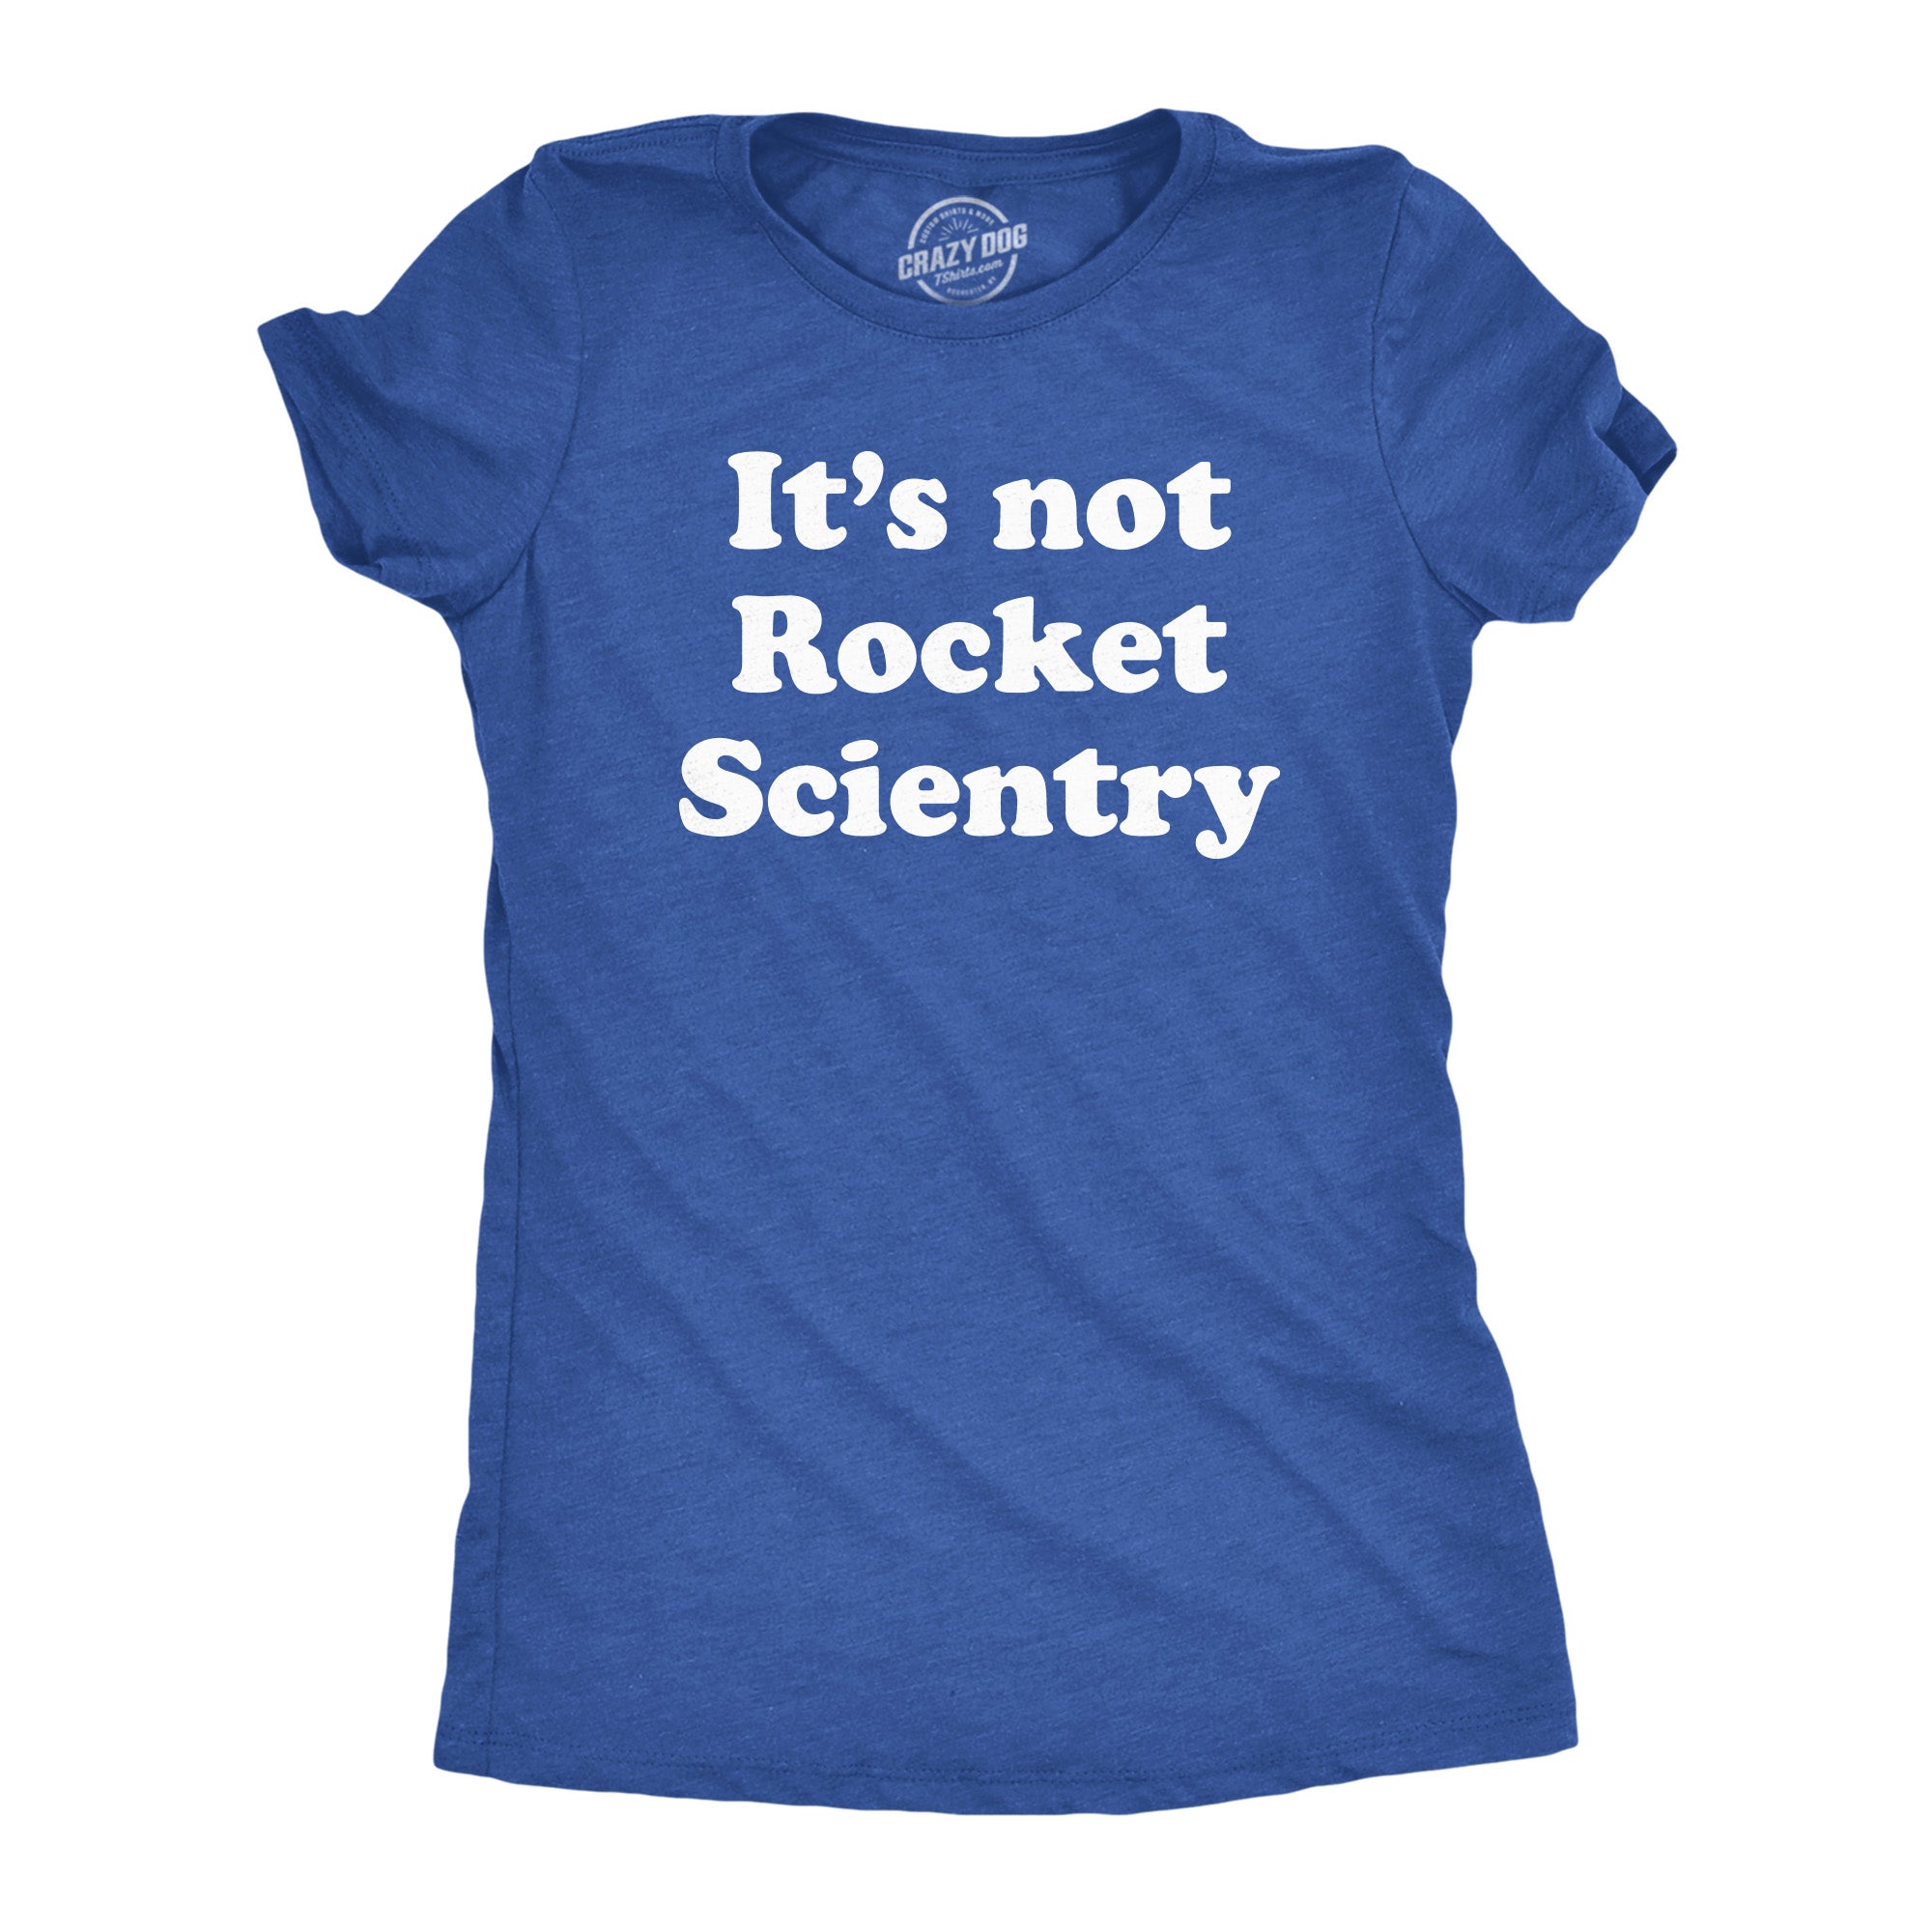 Funny Heather Royal - ROCKET Its Not Rocket Scientry Womens T Shirt Nerdy Sarcastic Tee